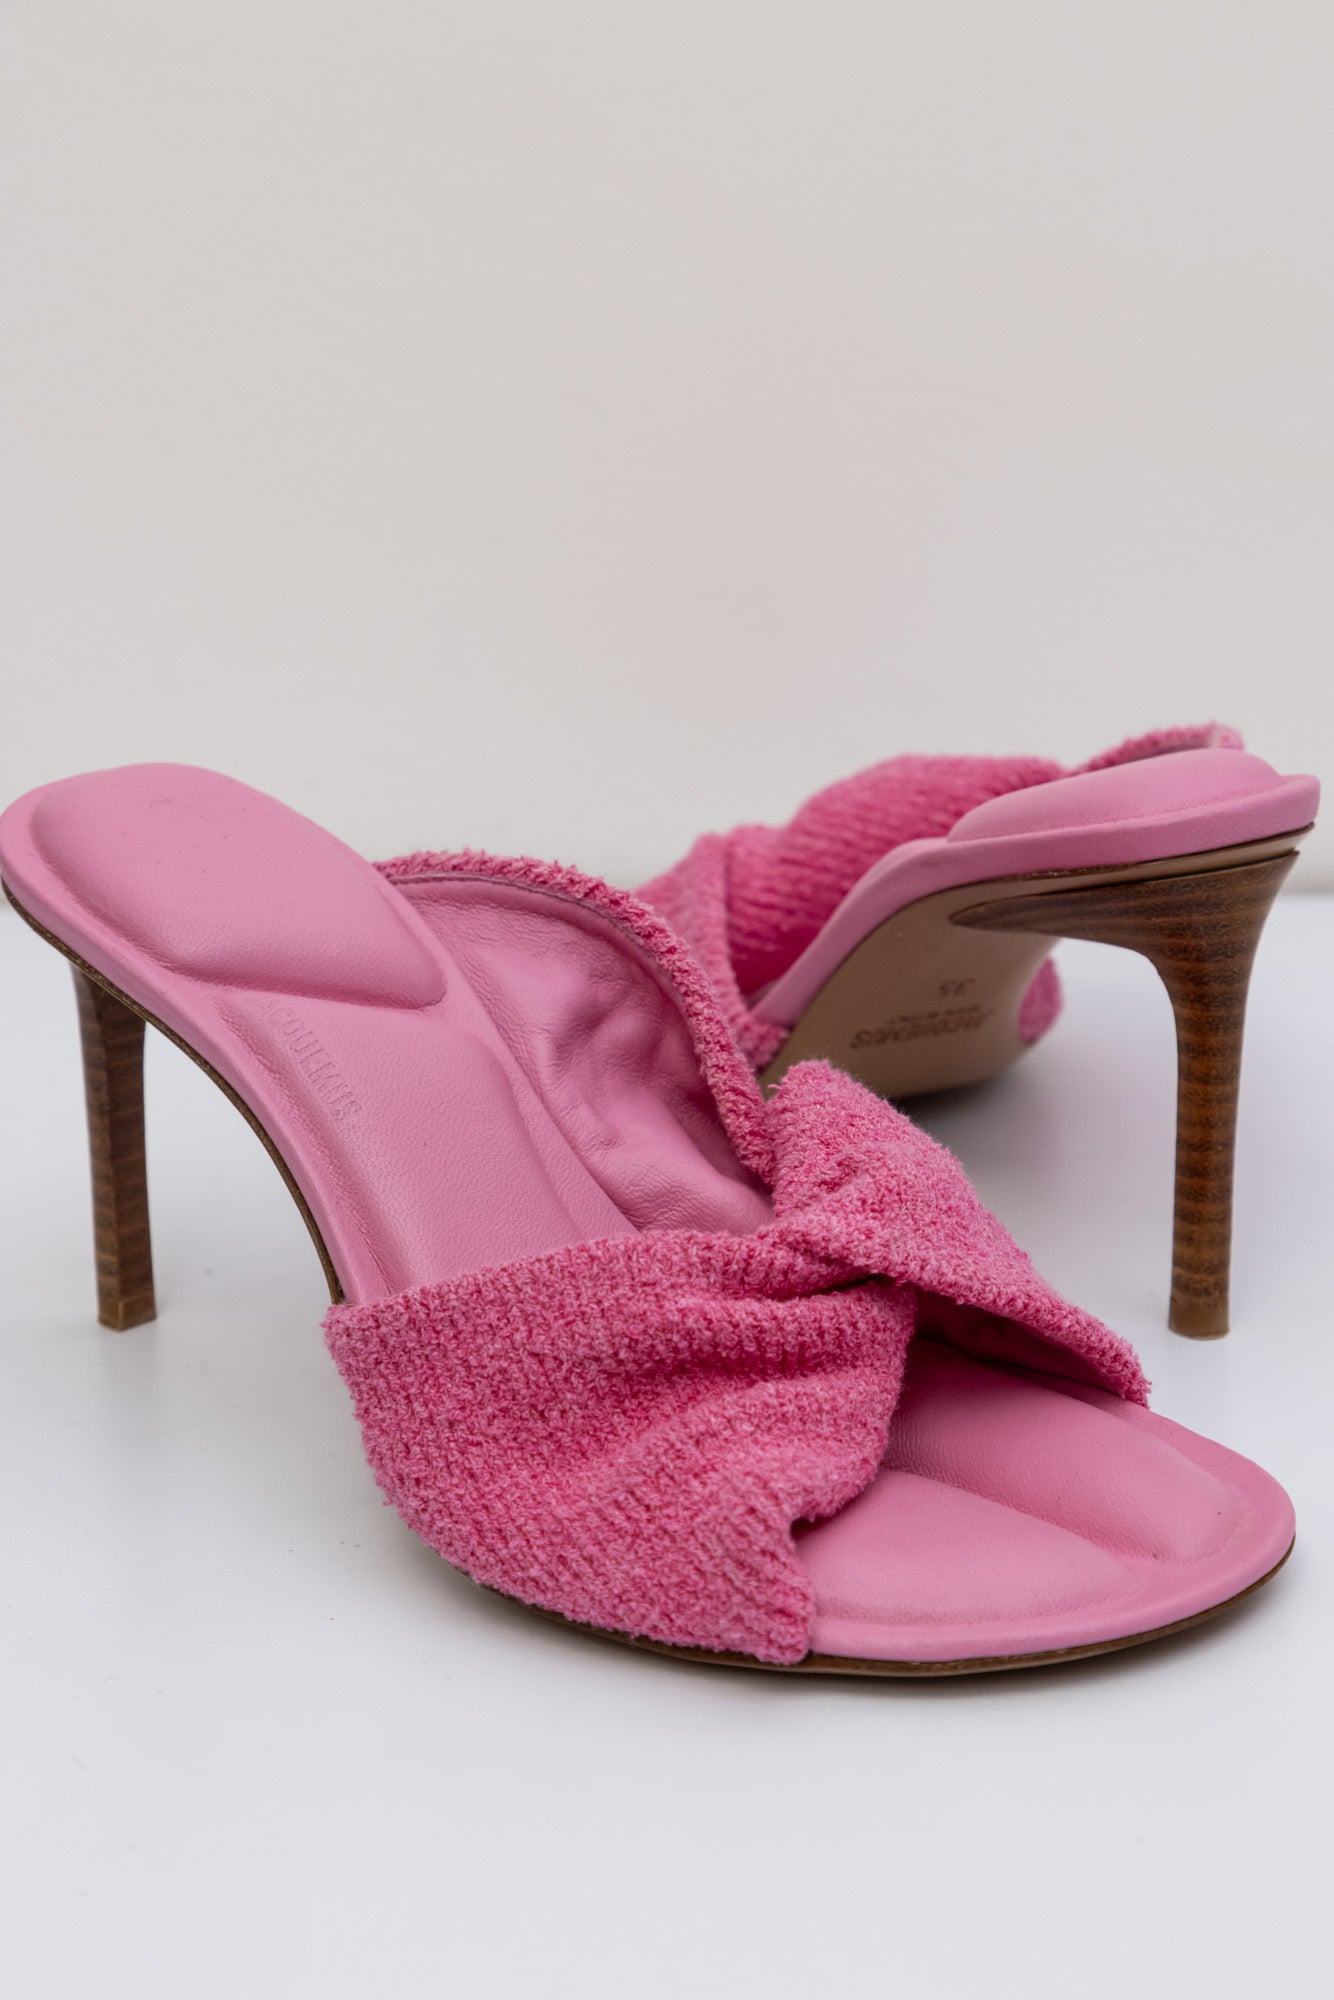 JACQUEMUS Pink 'Les Mules Bagnu' Heeled Sandals | Size IT 35 | Made in Italy